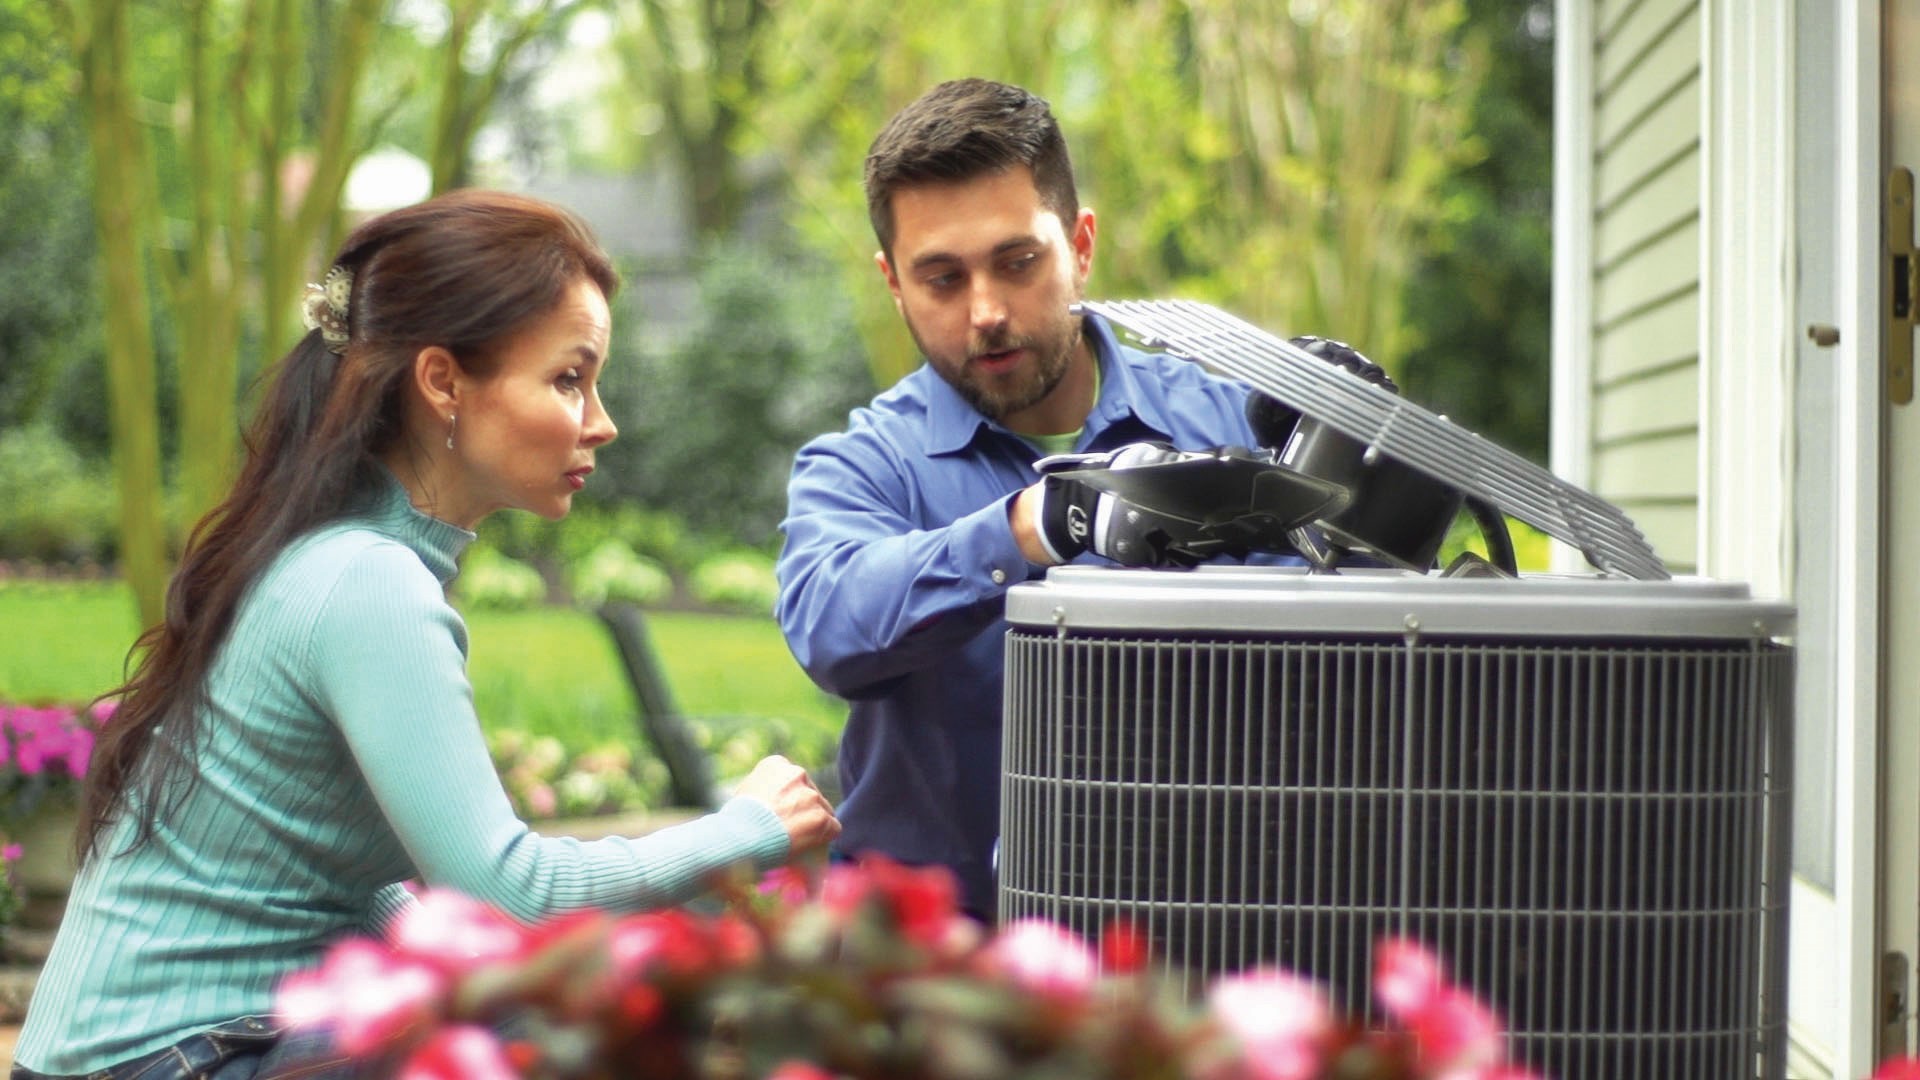 Heating And Air Conditioning Repair Companies Near Me